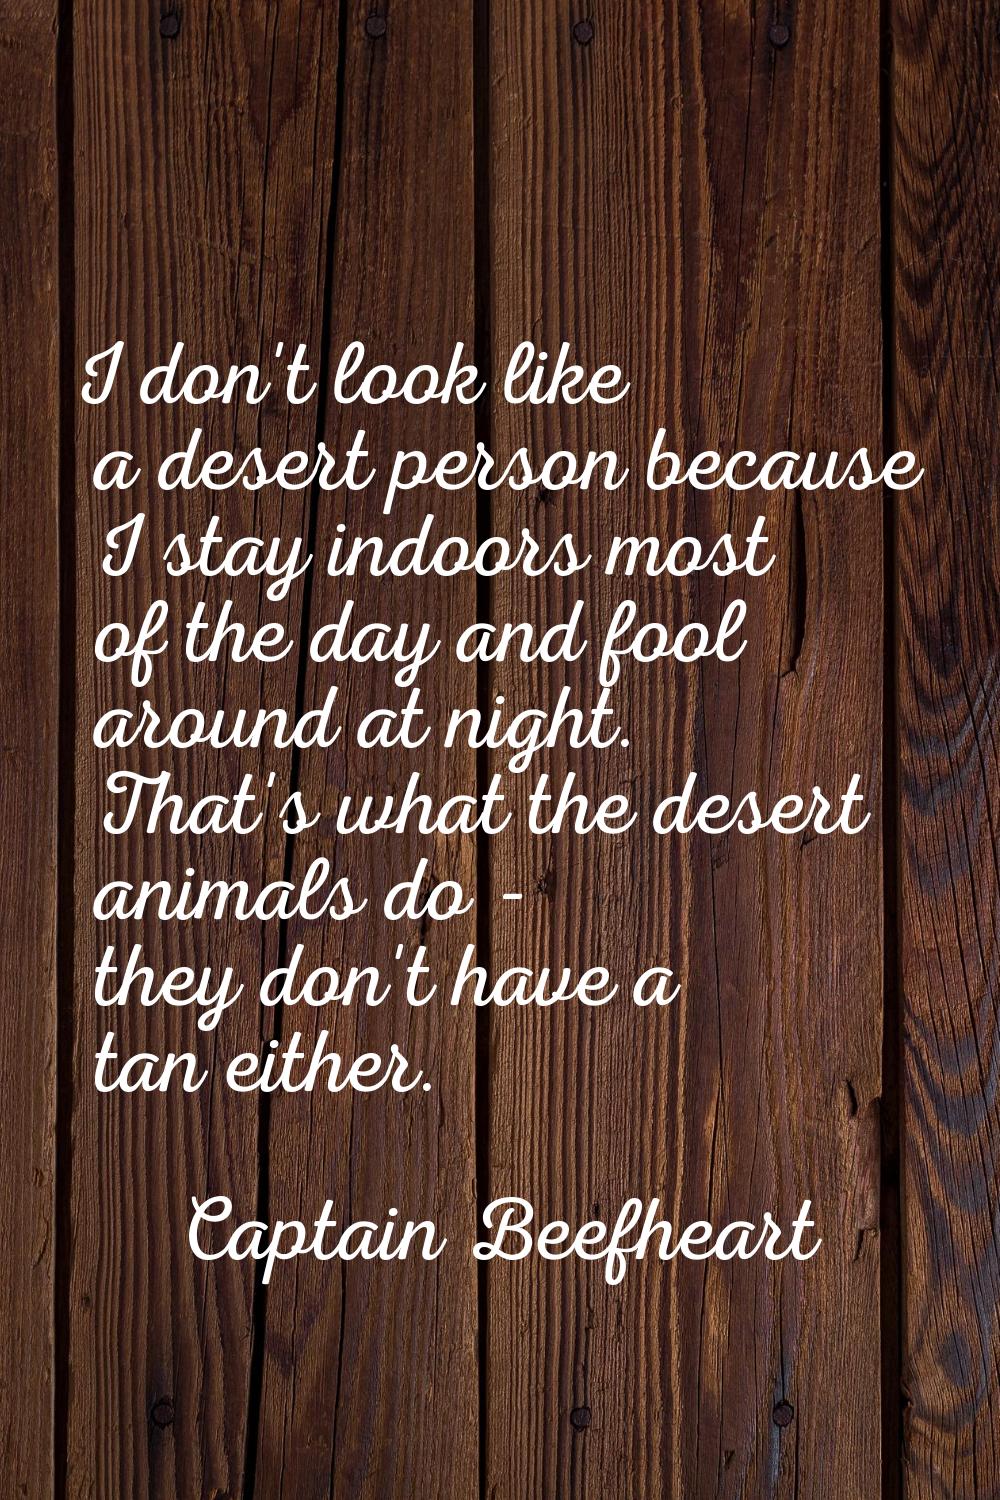 I don't look like a desert person because I stay indoors most of the day and fool around at night. 